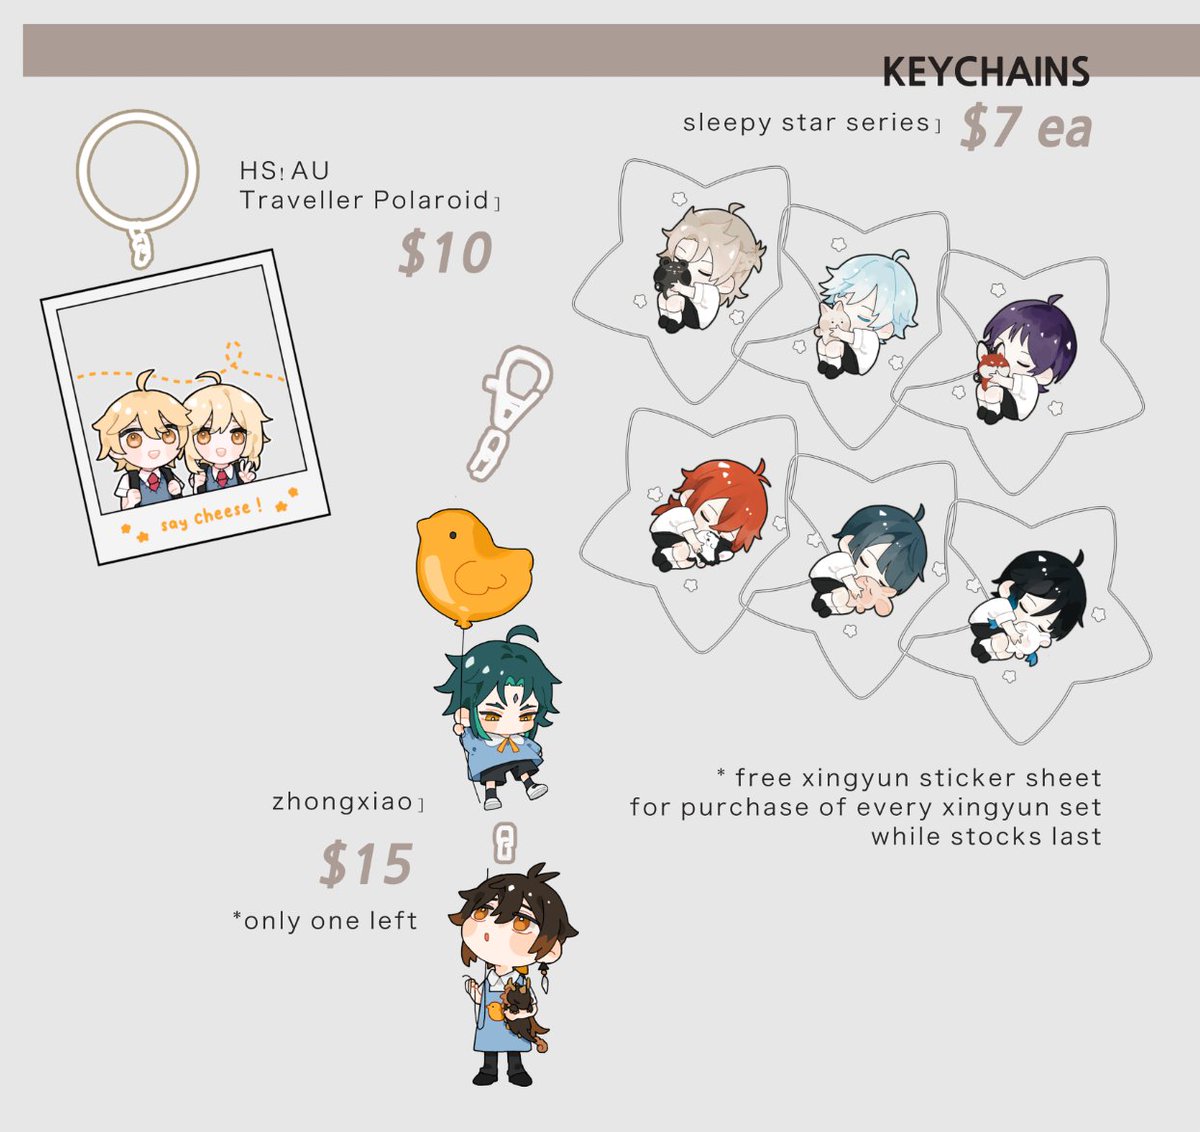 [RT 💕] Stock Clearance ! Here are some of my leftover products from stickers to t-shirts!

Link to the gform + info will be below (also includes preorder for fishing childe cham)

If you have any questions just ask 🫡 , thank you for viewing! 